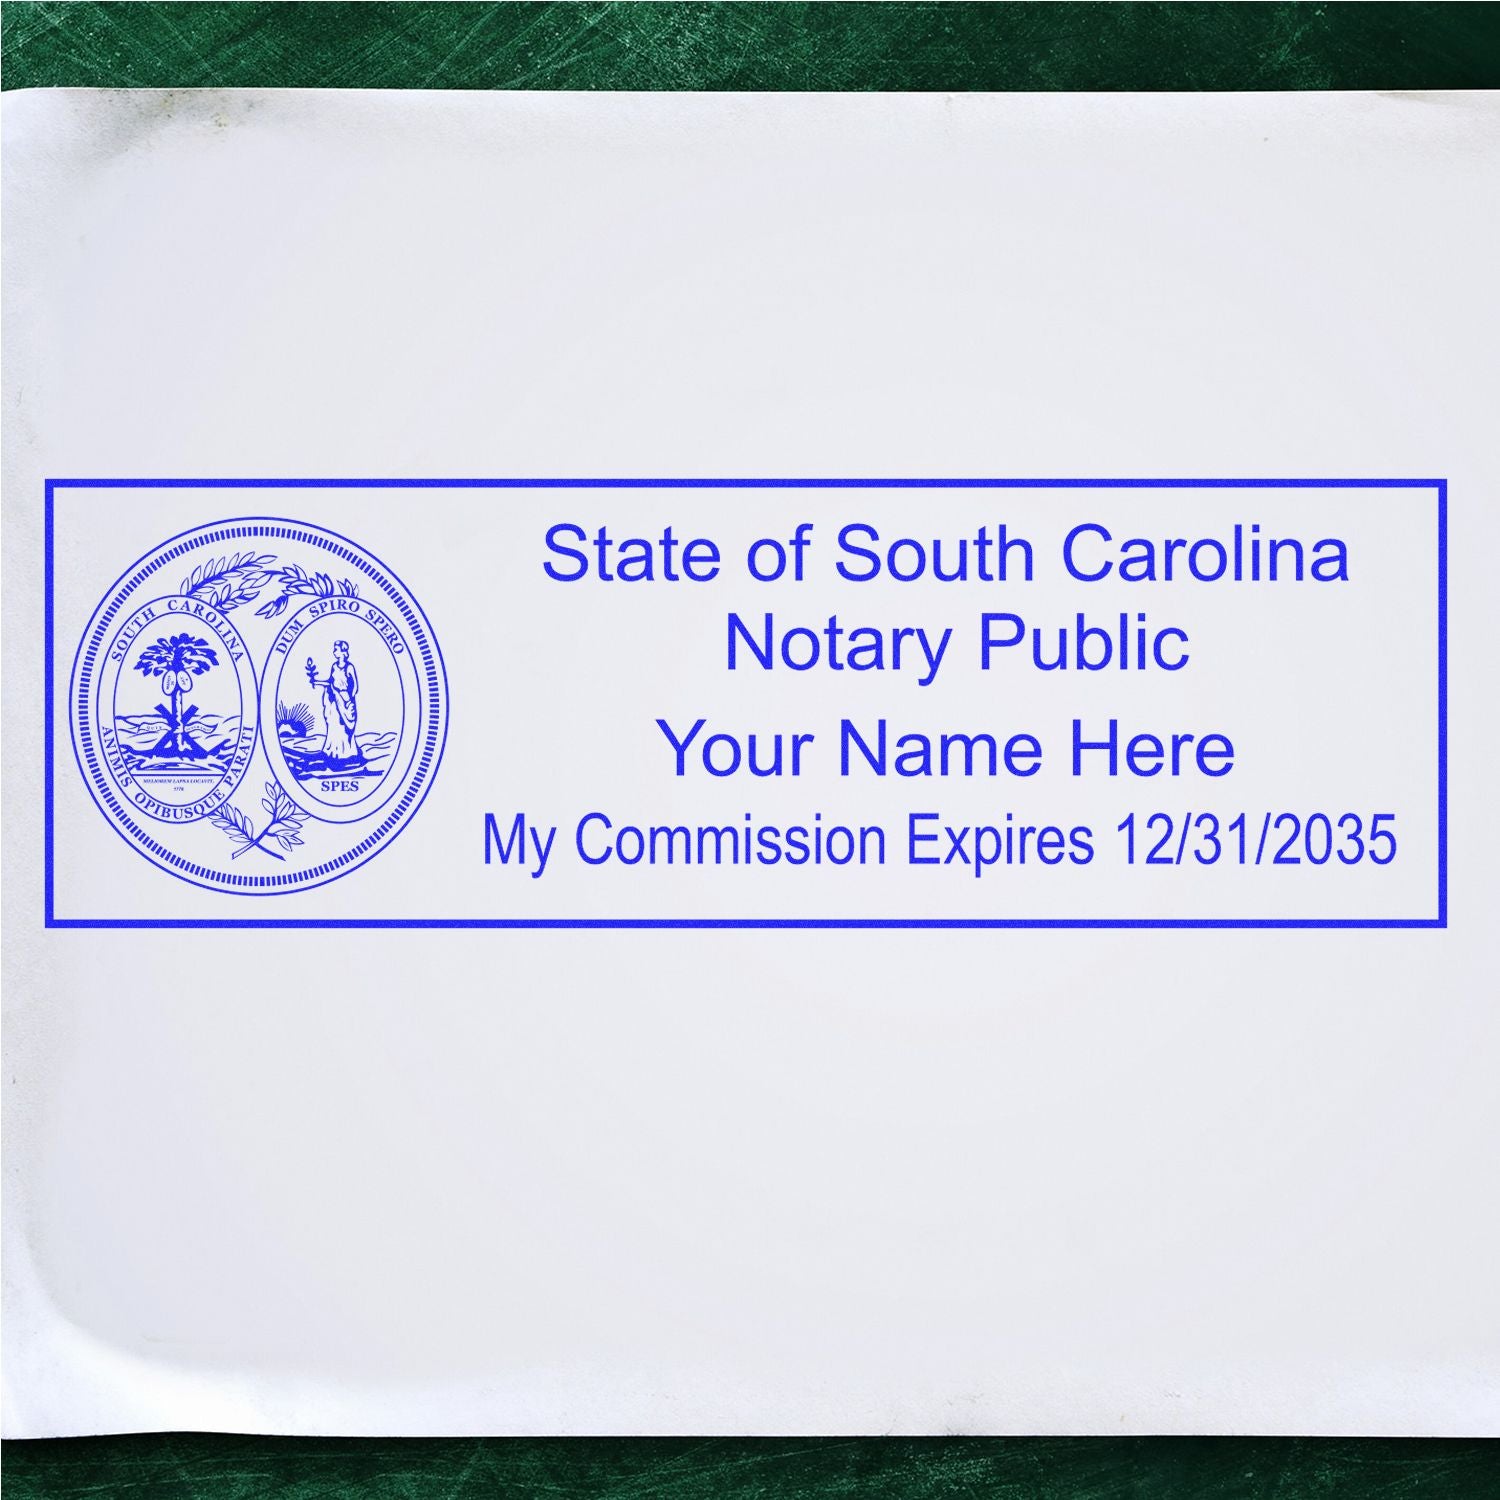 This paper is stamped with a sample imprint of the Slim Pre-Inked State Seal Notary Stamp for South Carolina, signifying its quality and reliability.